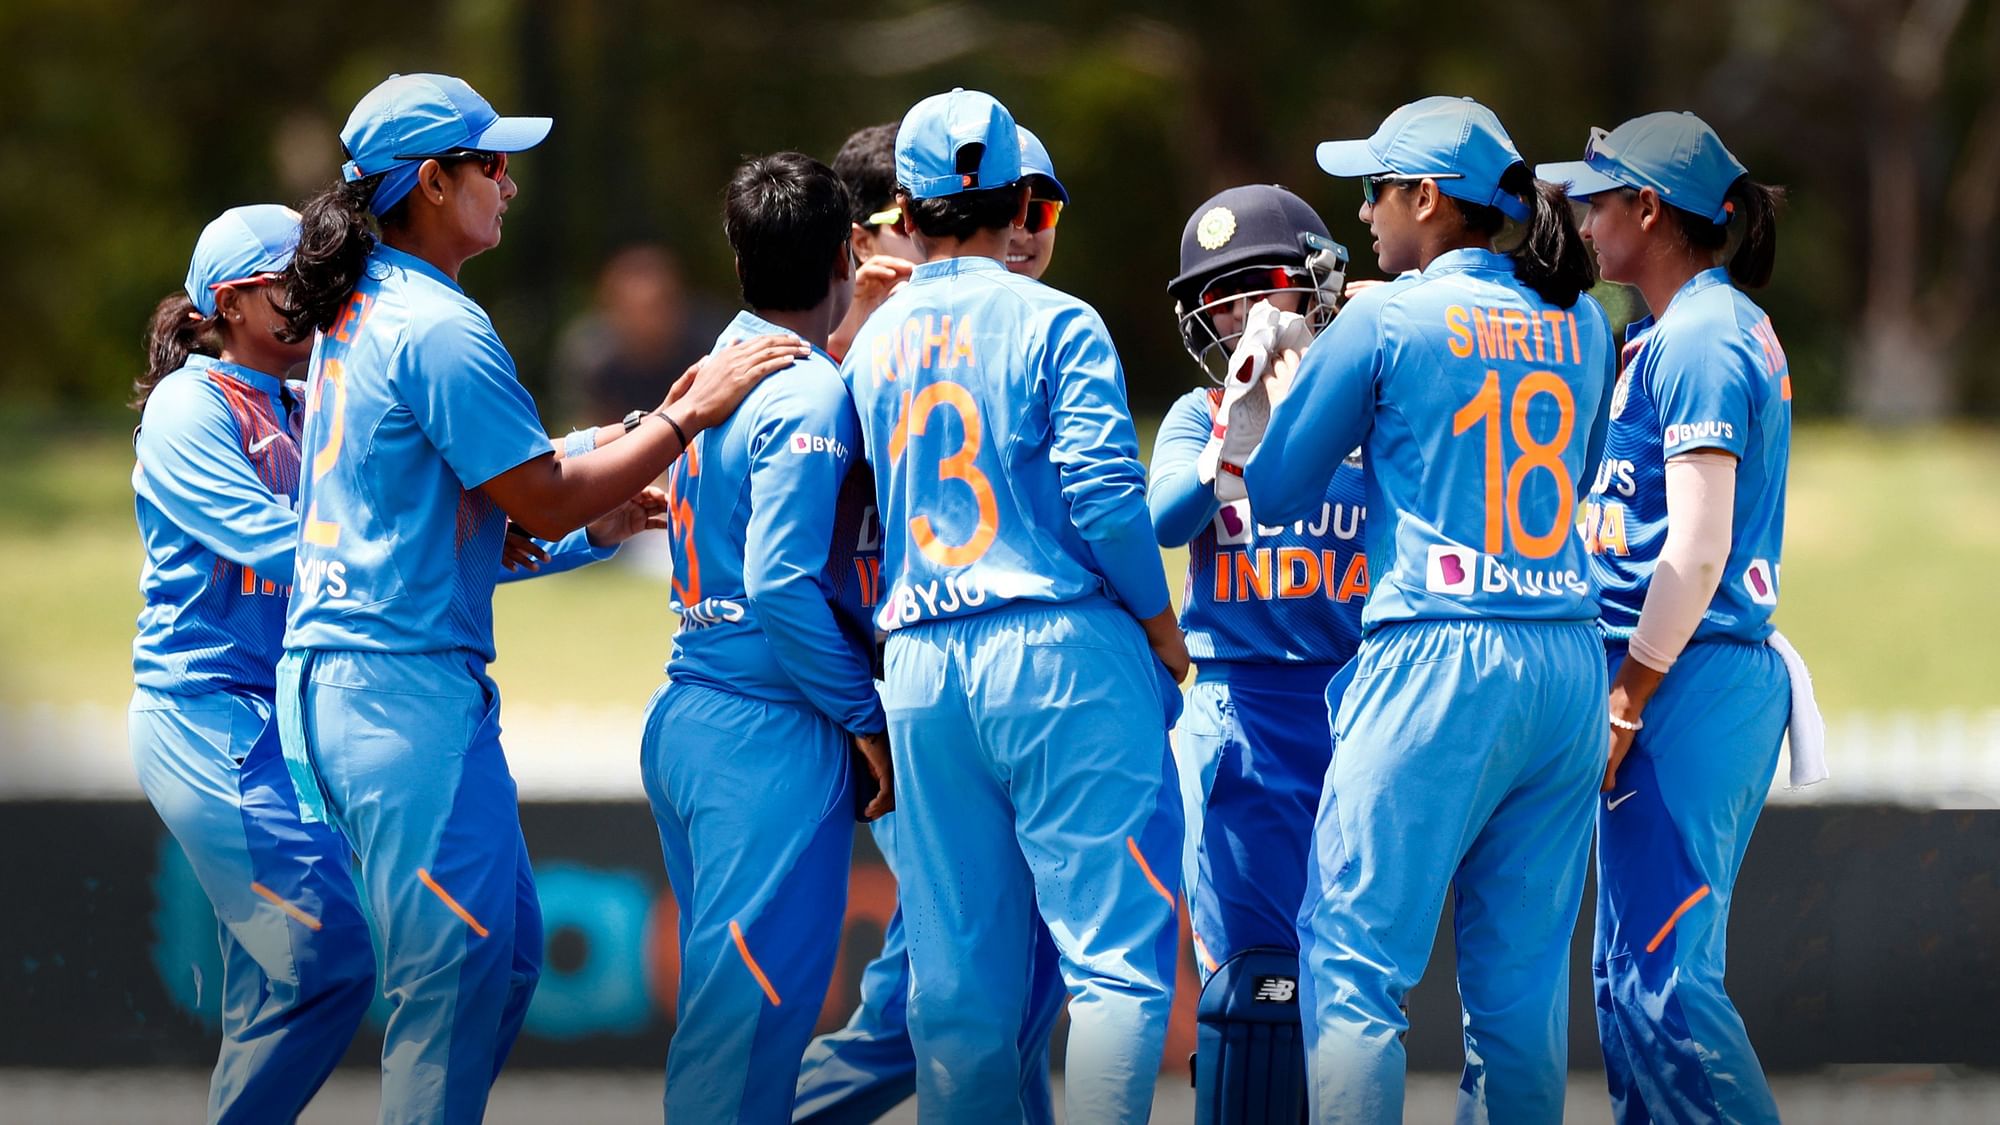 India geared up for the ICC women’s T20 World Cup with a thrilling two-run win over the West Indies in a low-scoring warm-up match on Tuesday, 18 February.